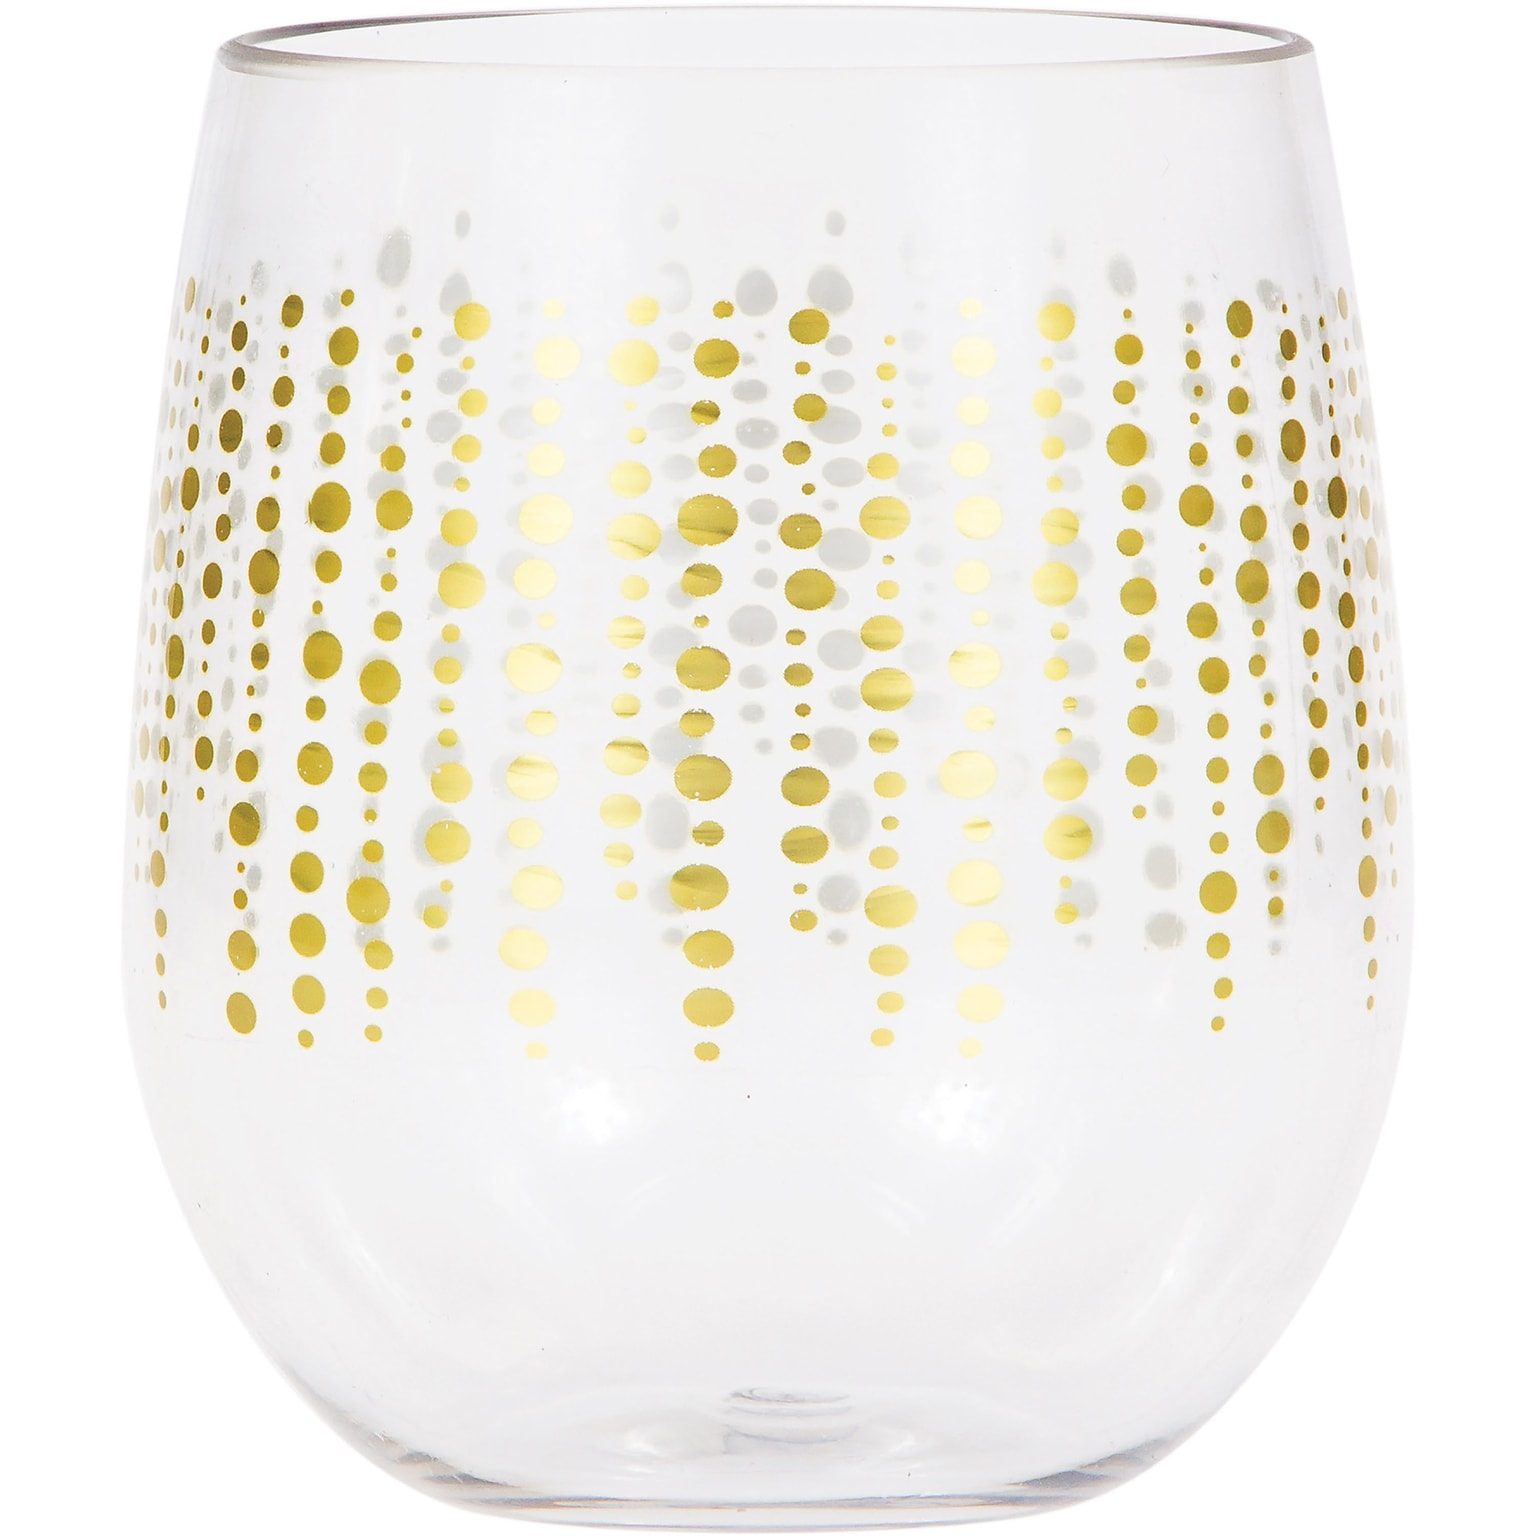 Glittering Gold Dots Plastic Stemless Wine Glasses by Elise, 6 Count